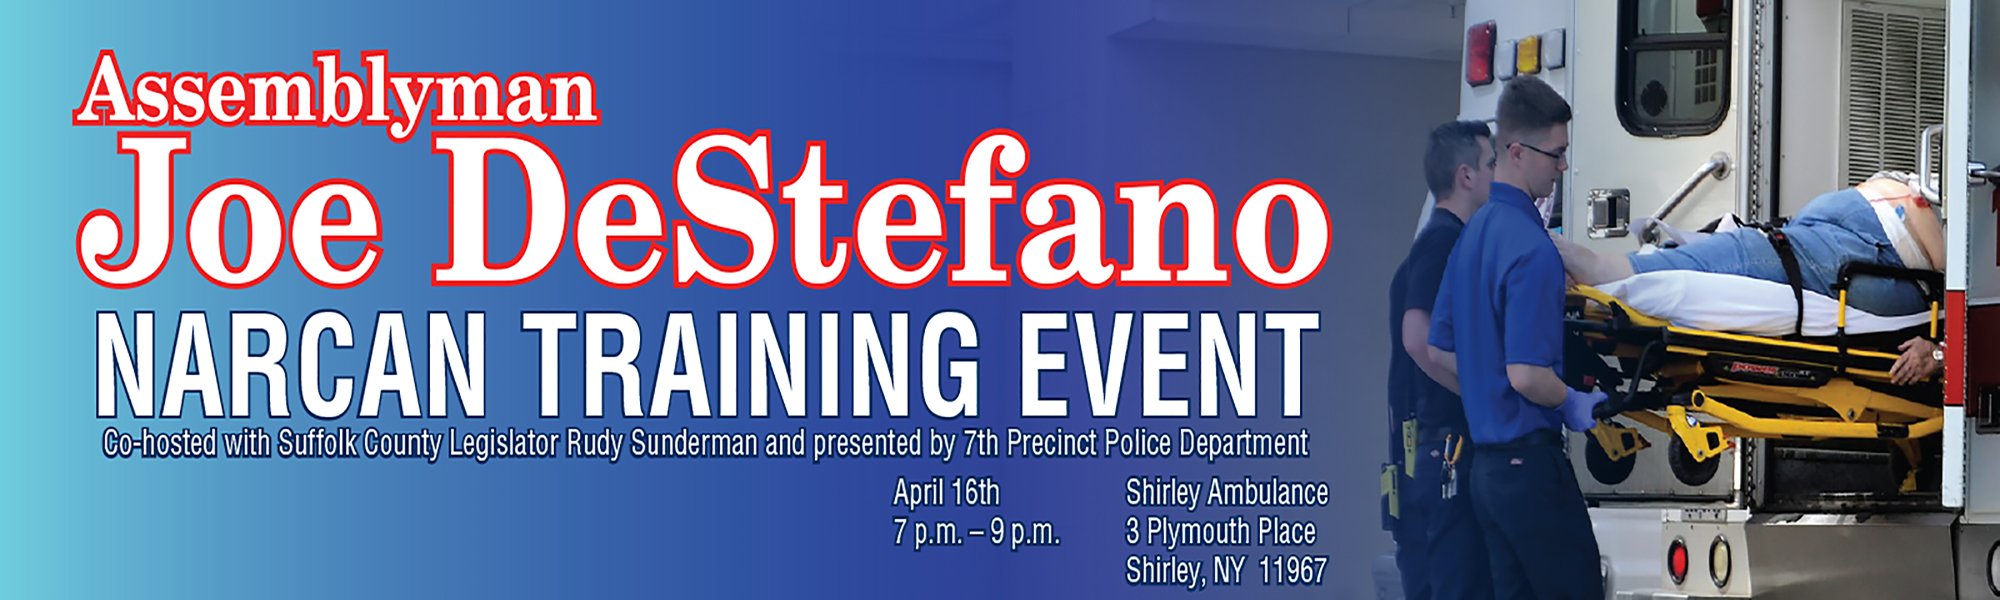 NARCAN Training Event - April 16, 2019